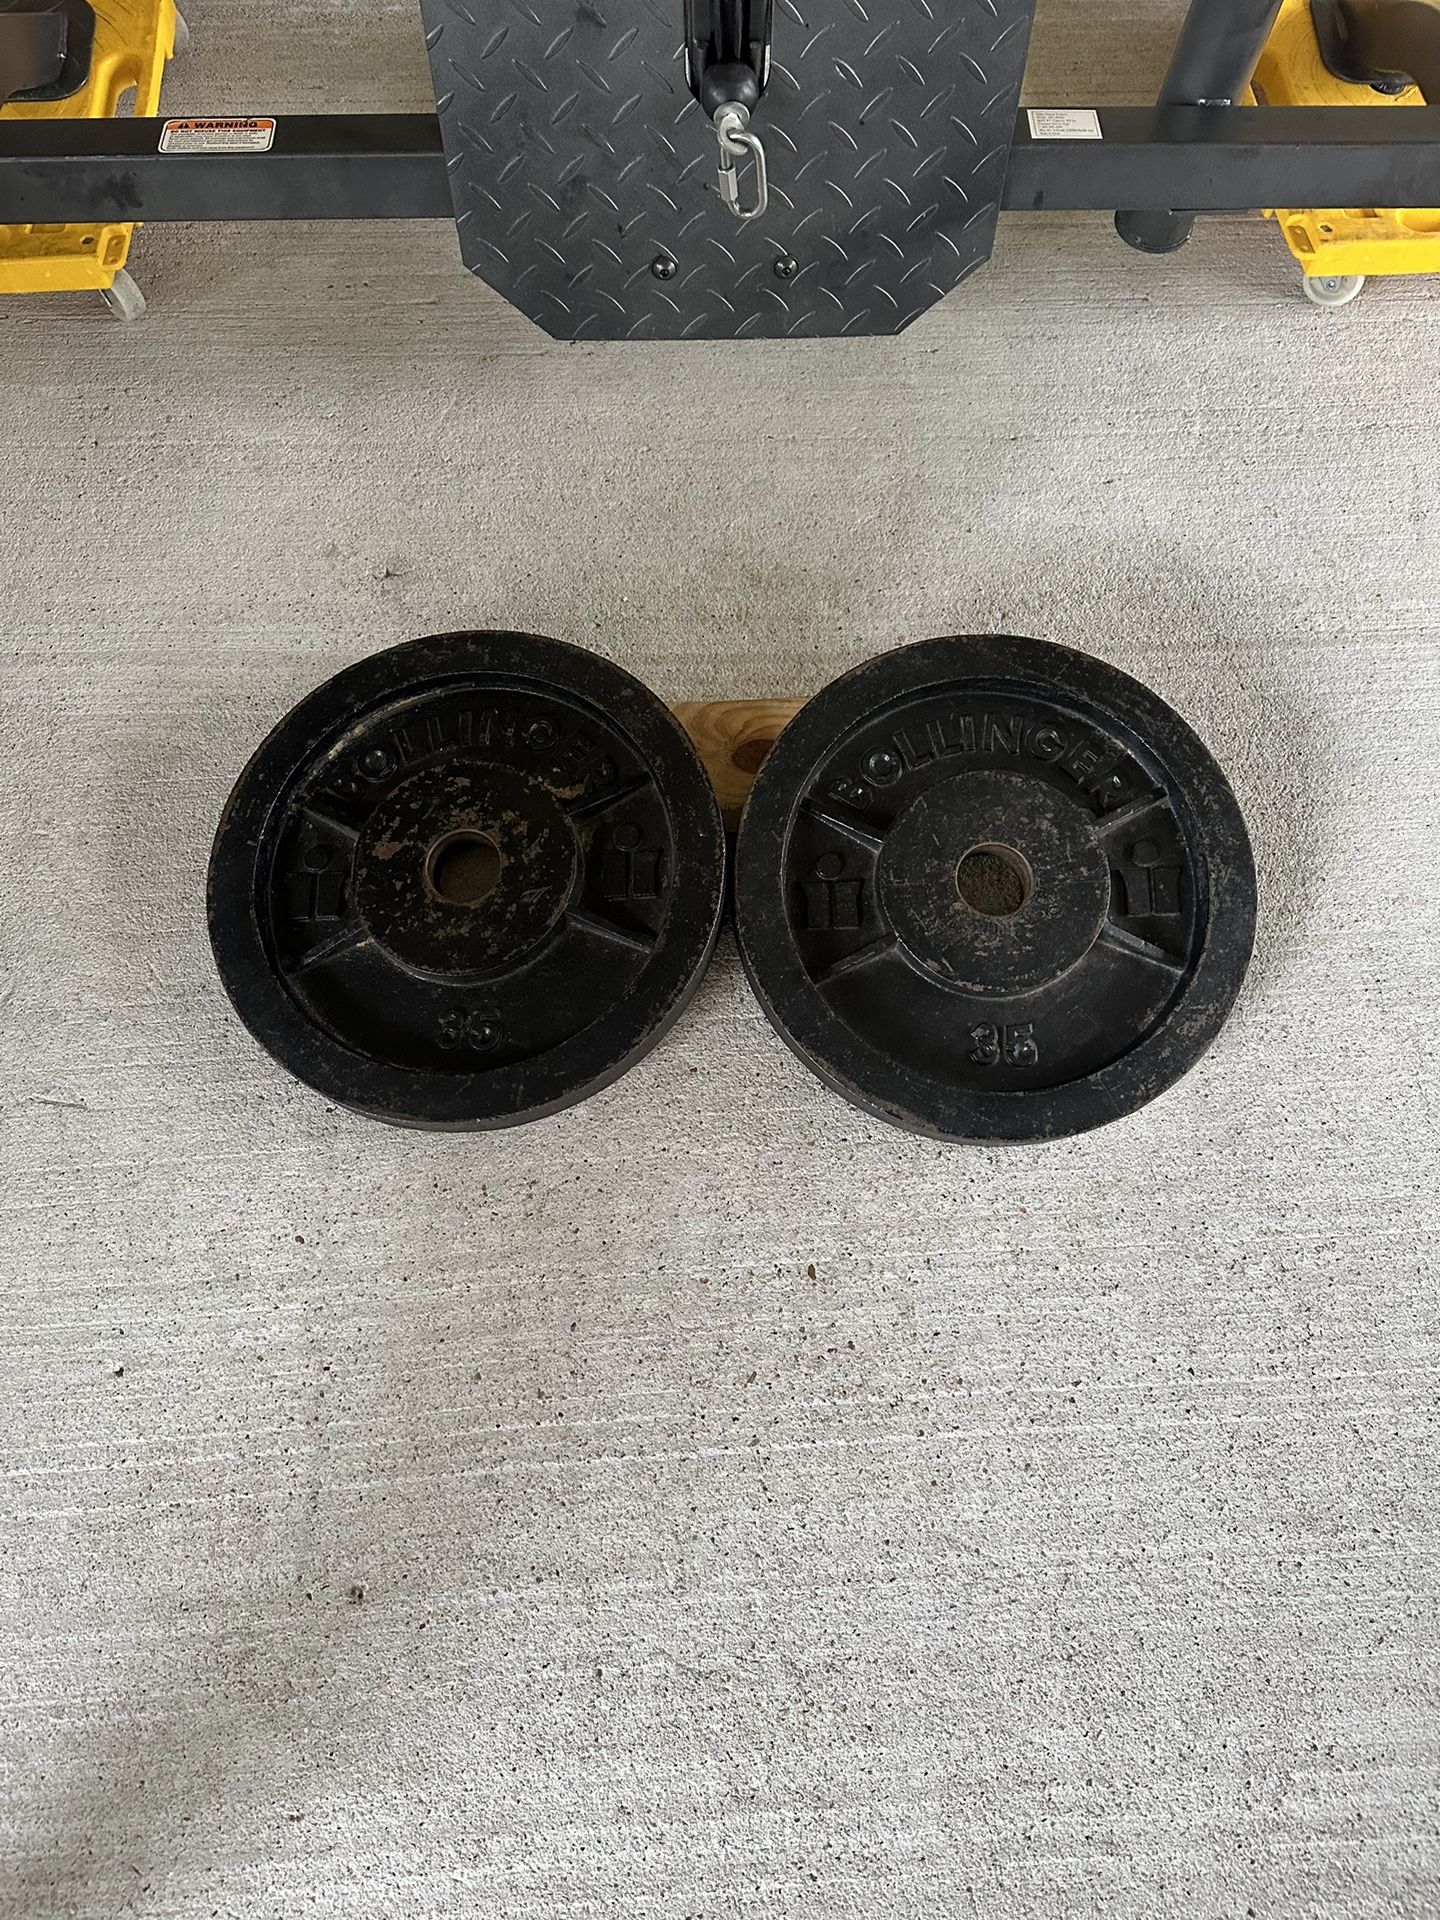 BOLLINGER  35Lb Olympic Barbell Weight plates $60  